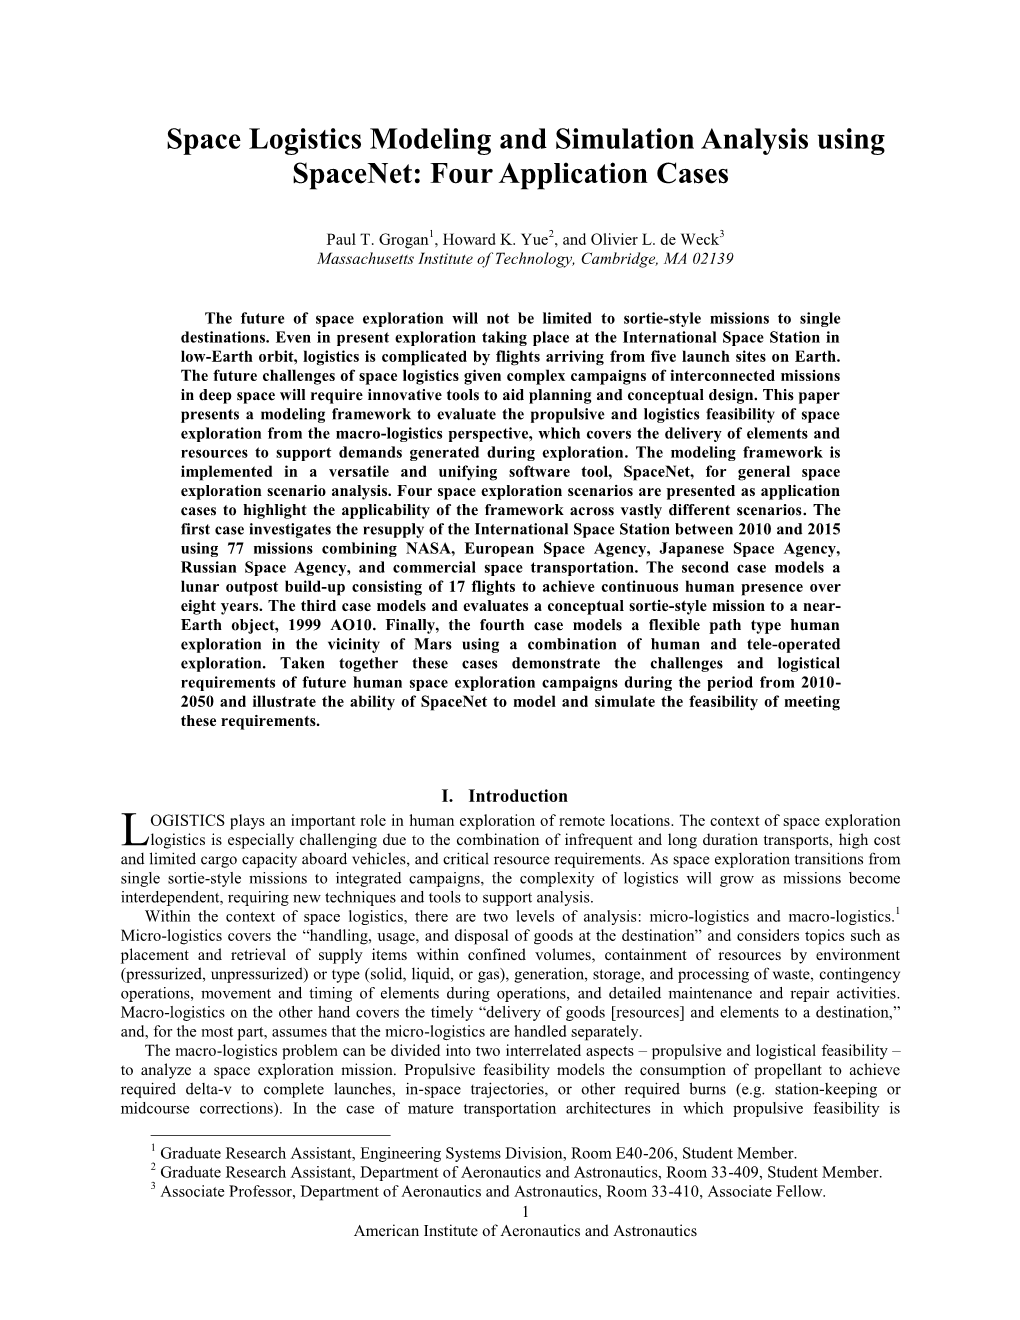 Space Logistics Modeling and Simulation Analysis Using Spacenet: Four Application Cases